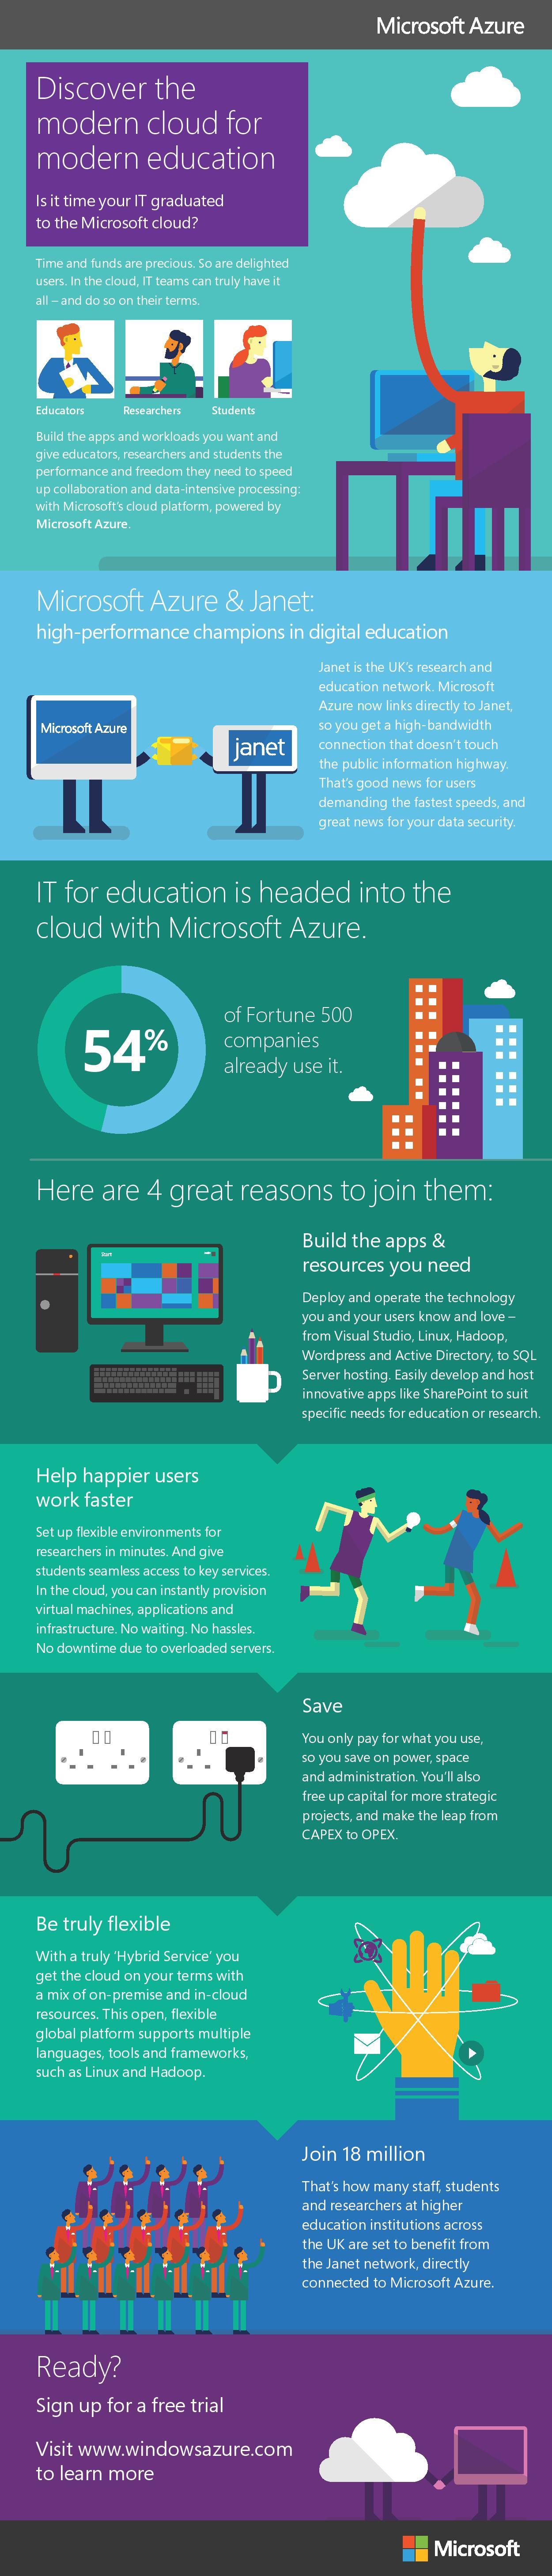 Microsoft Azure in Education Infographic